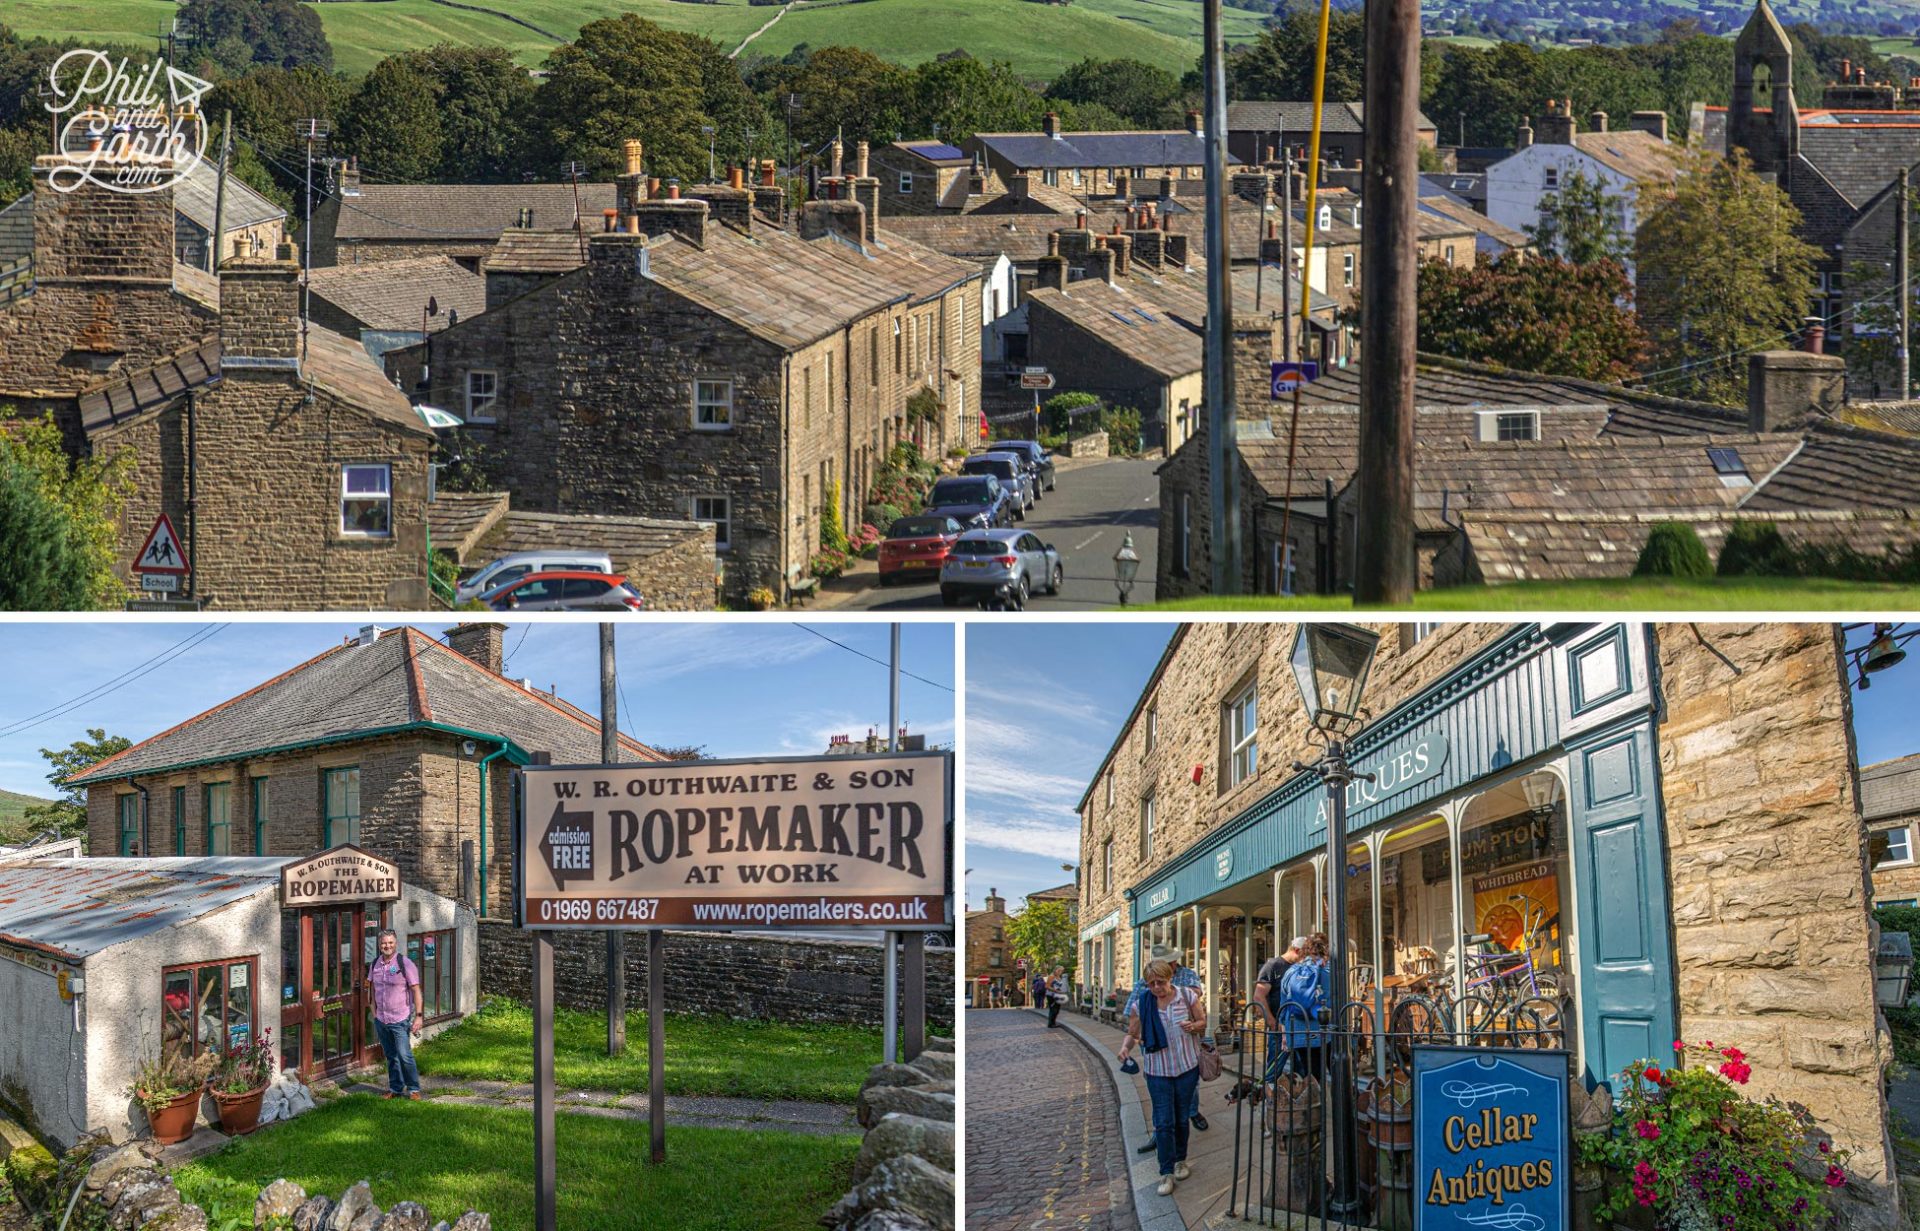 The Best Yorkshire Dales Villages and Attractions - Phil and Garth